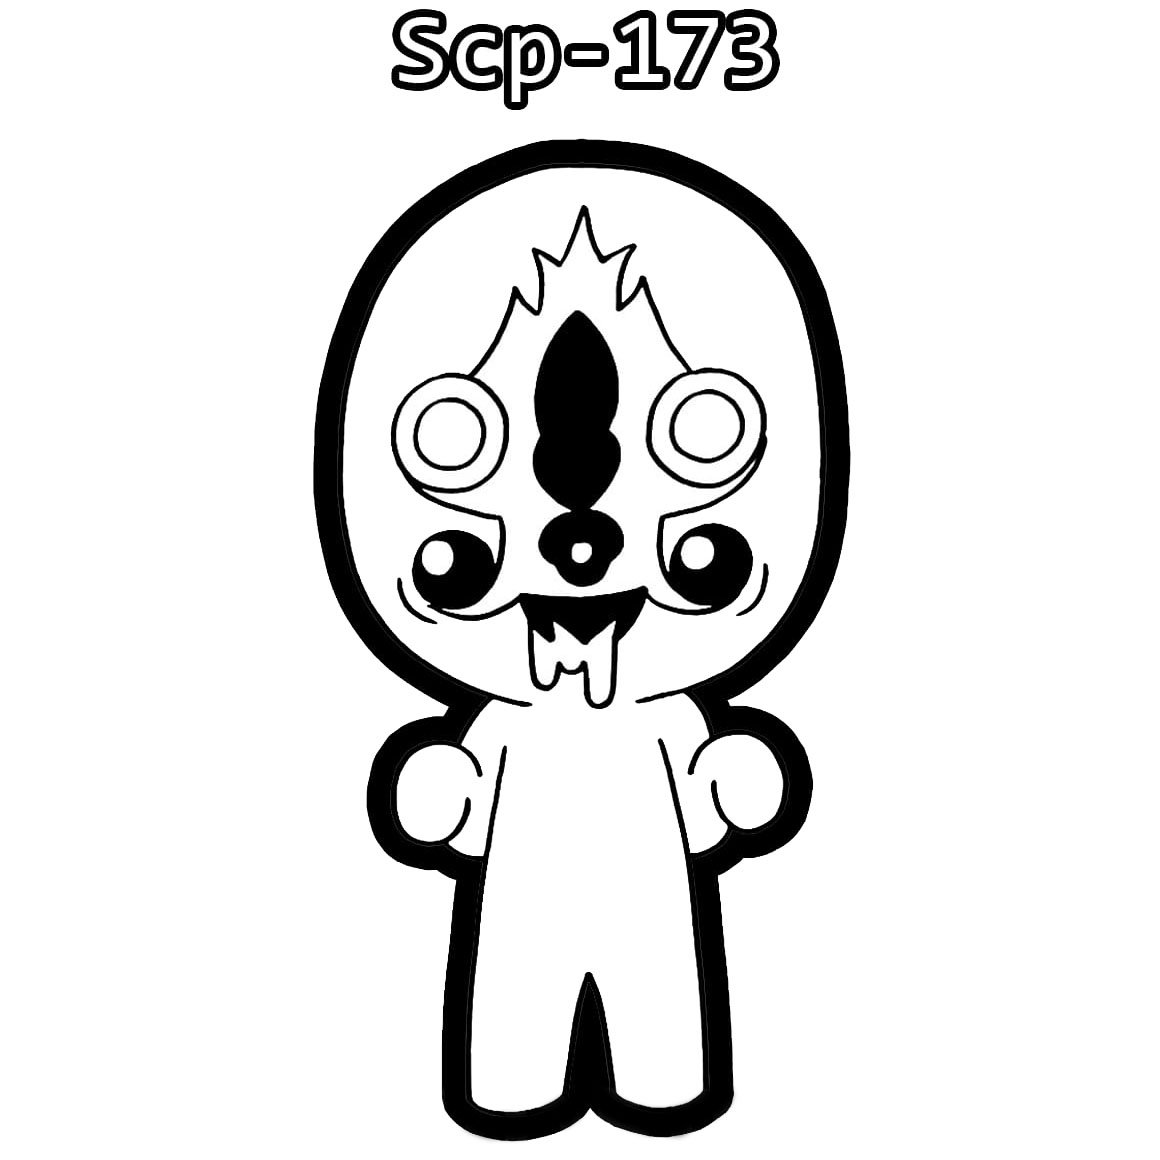 Free Scp-173 Coloring Pages Sticker Template printable